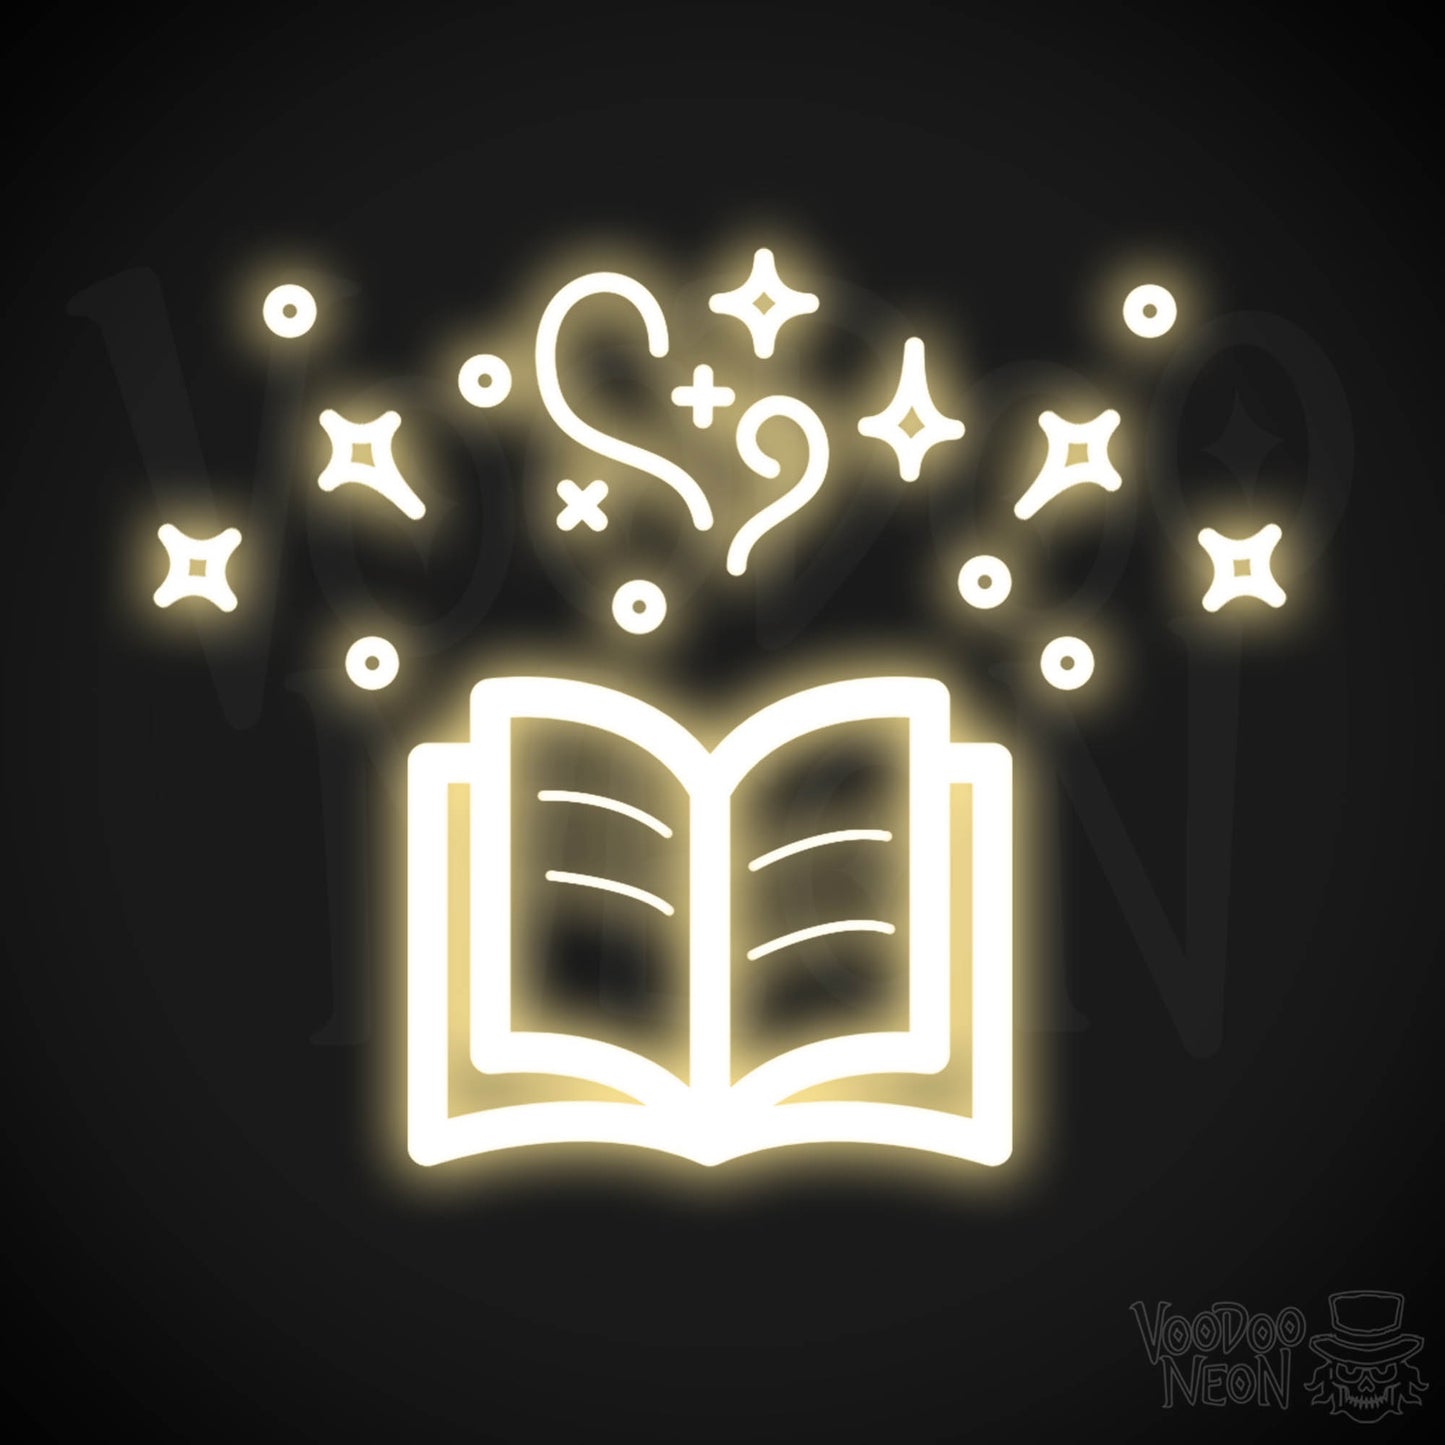 Neon Spell Book - Spell Book Neon Sign - LED Neon Wall Art - Color Warm White